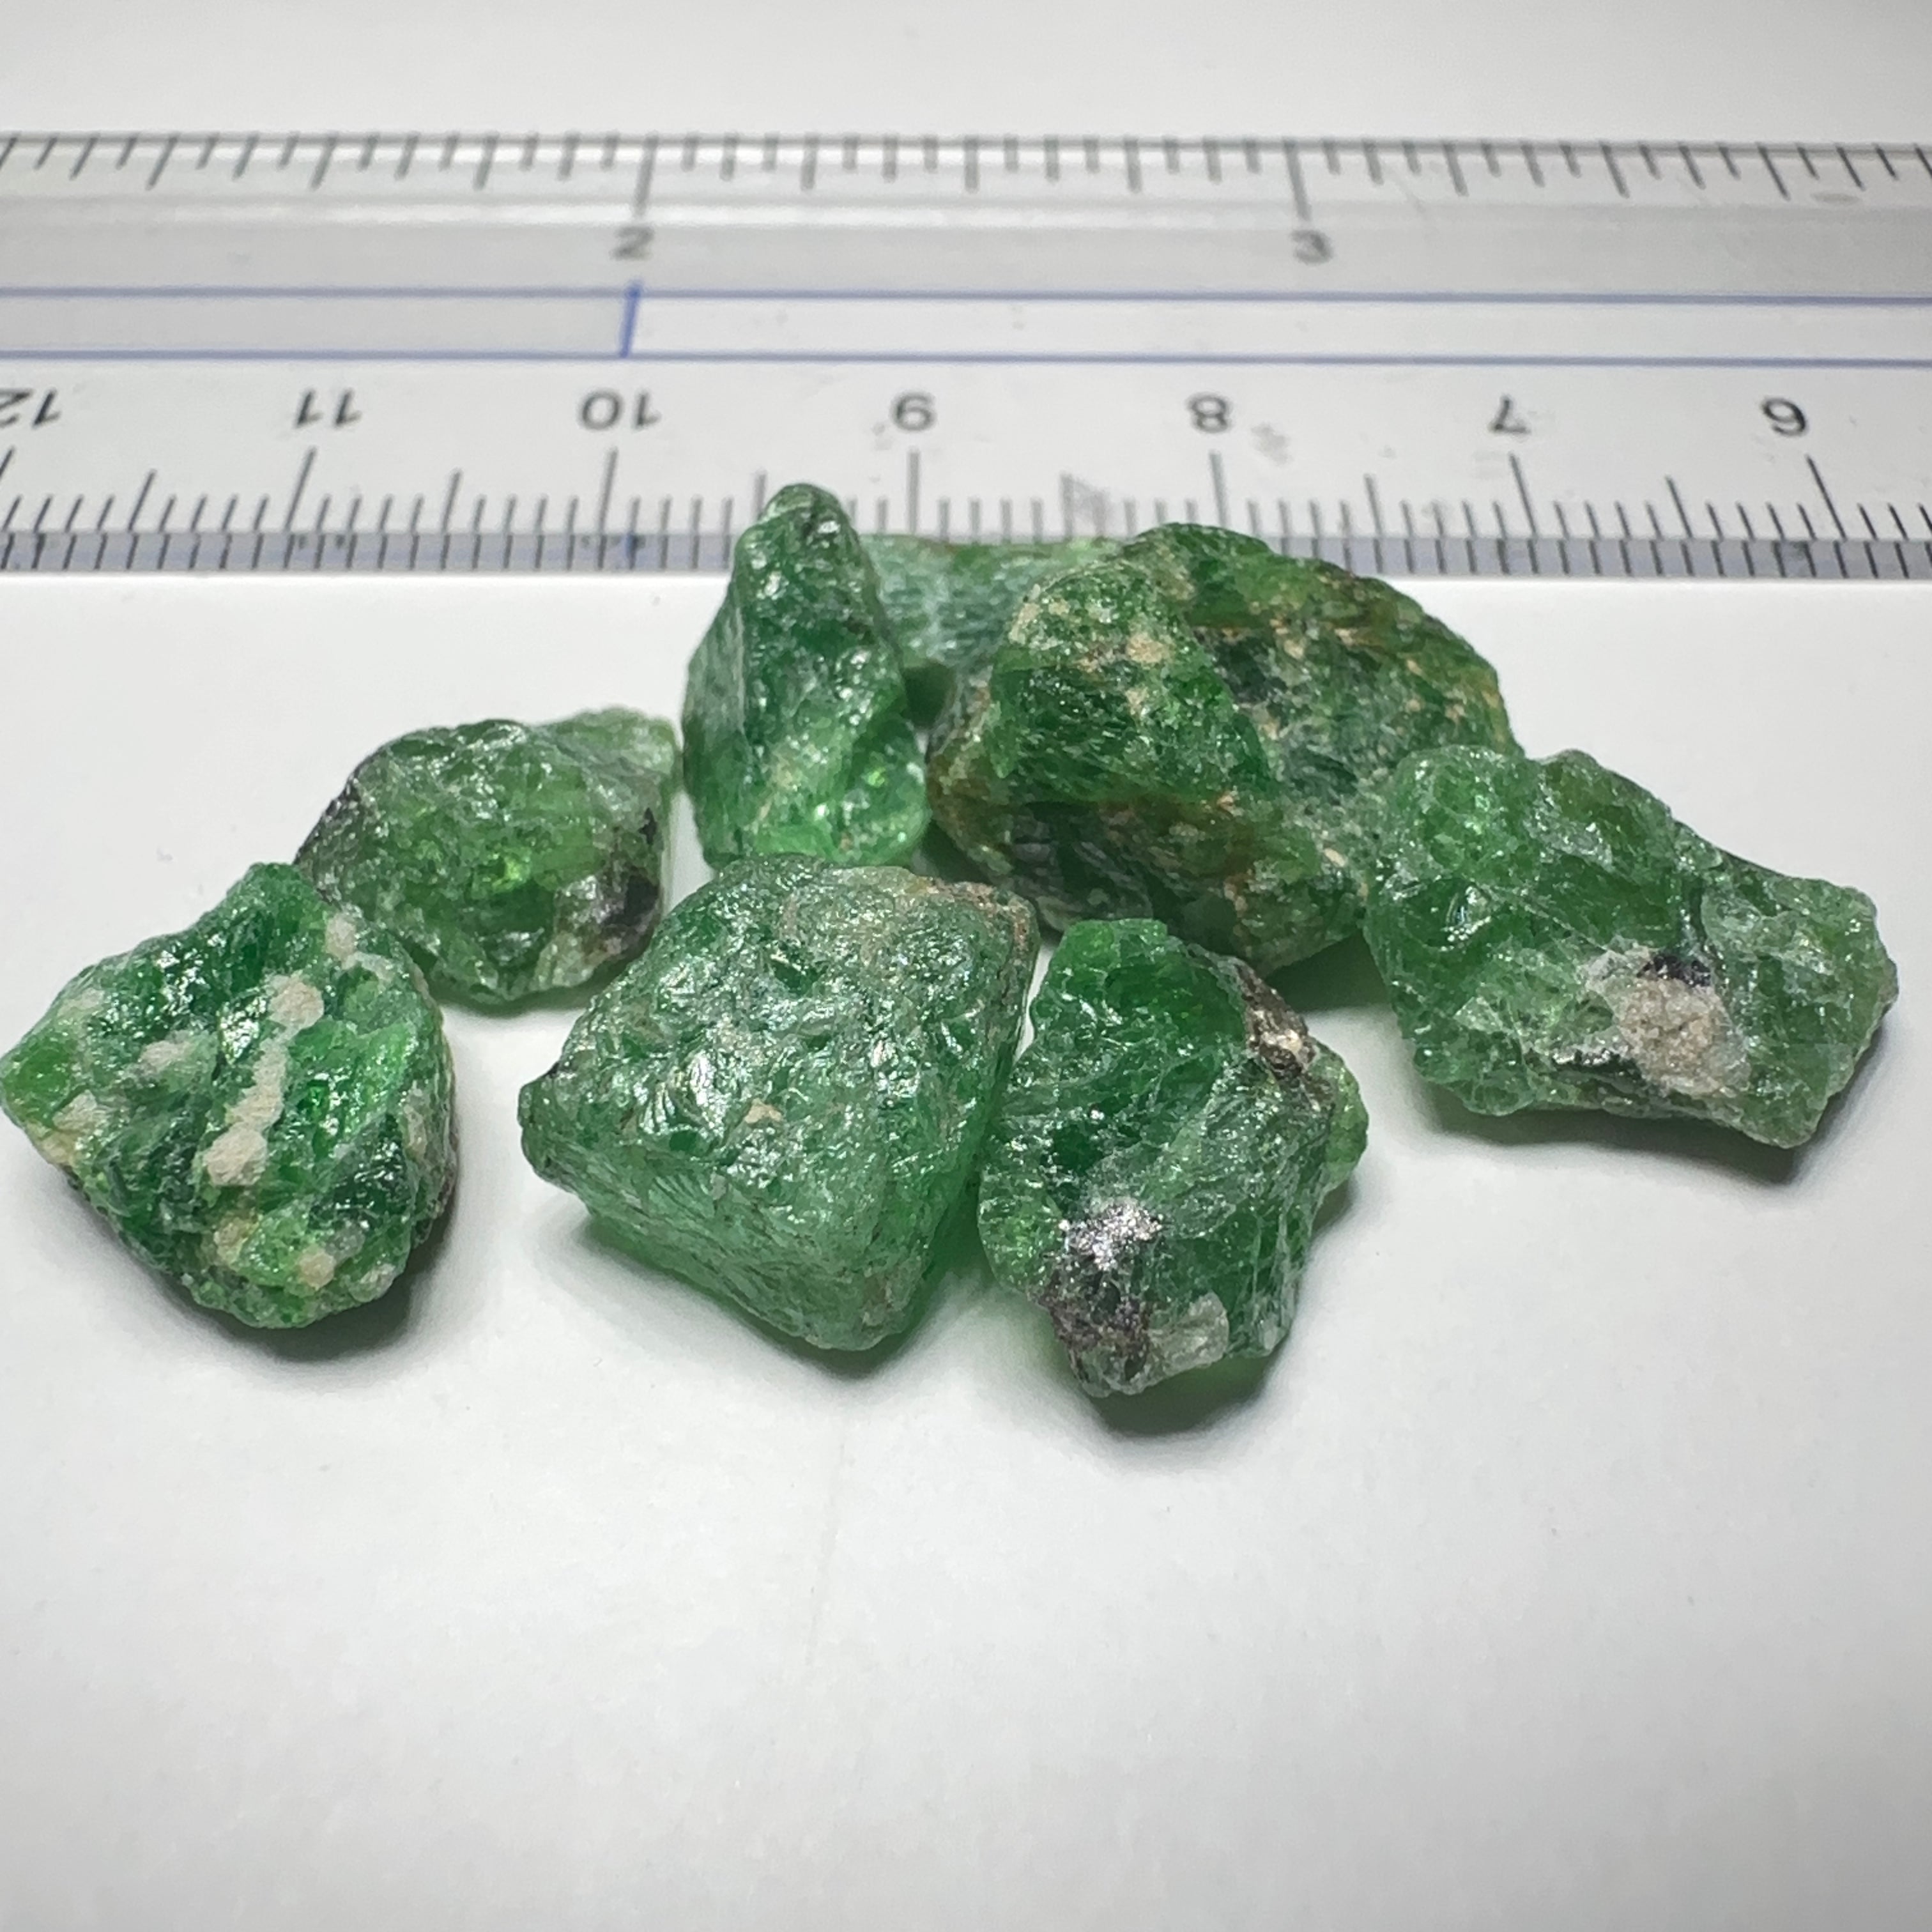 48.73ct Tsavorite Garnet Lot, Tanzania. Untreated Unheated. 3.05ct- 12.67ct. Good as specimens to add to a collection